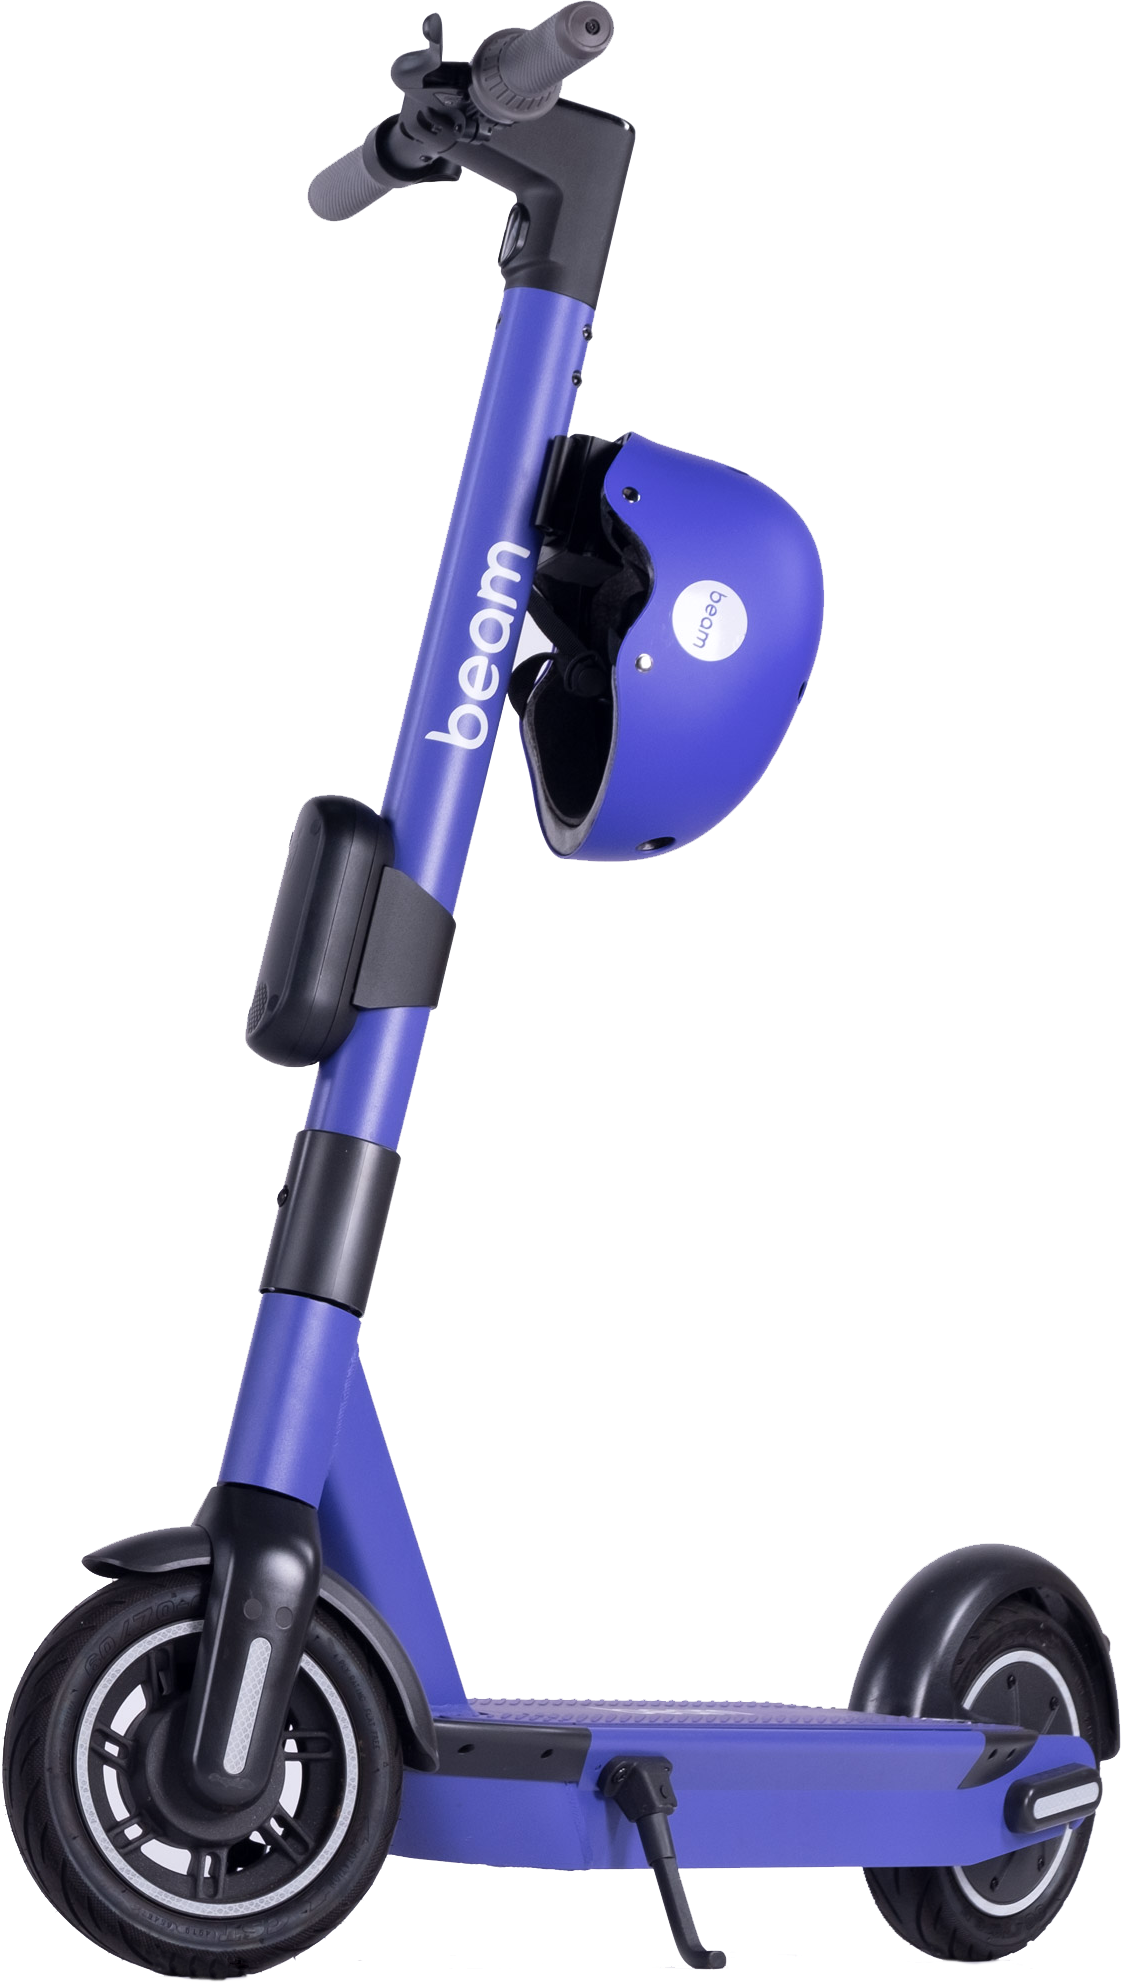 Scooter PNG Image File